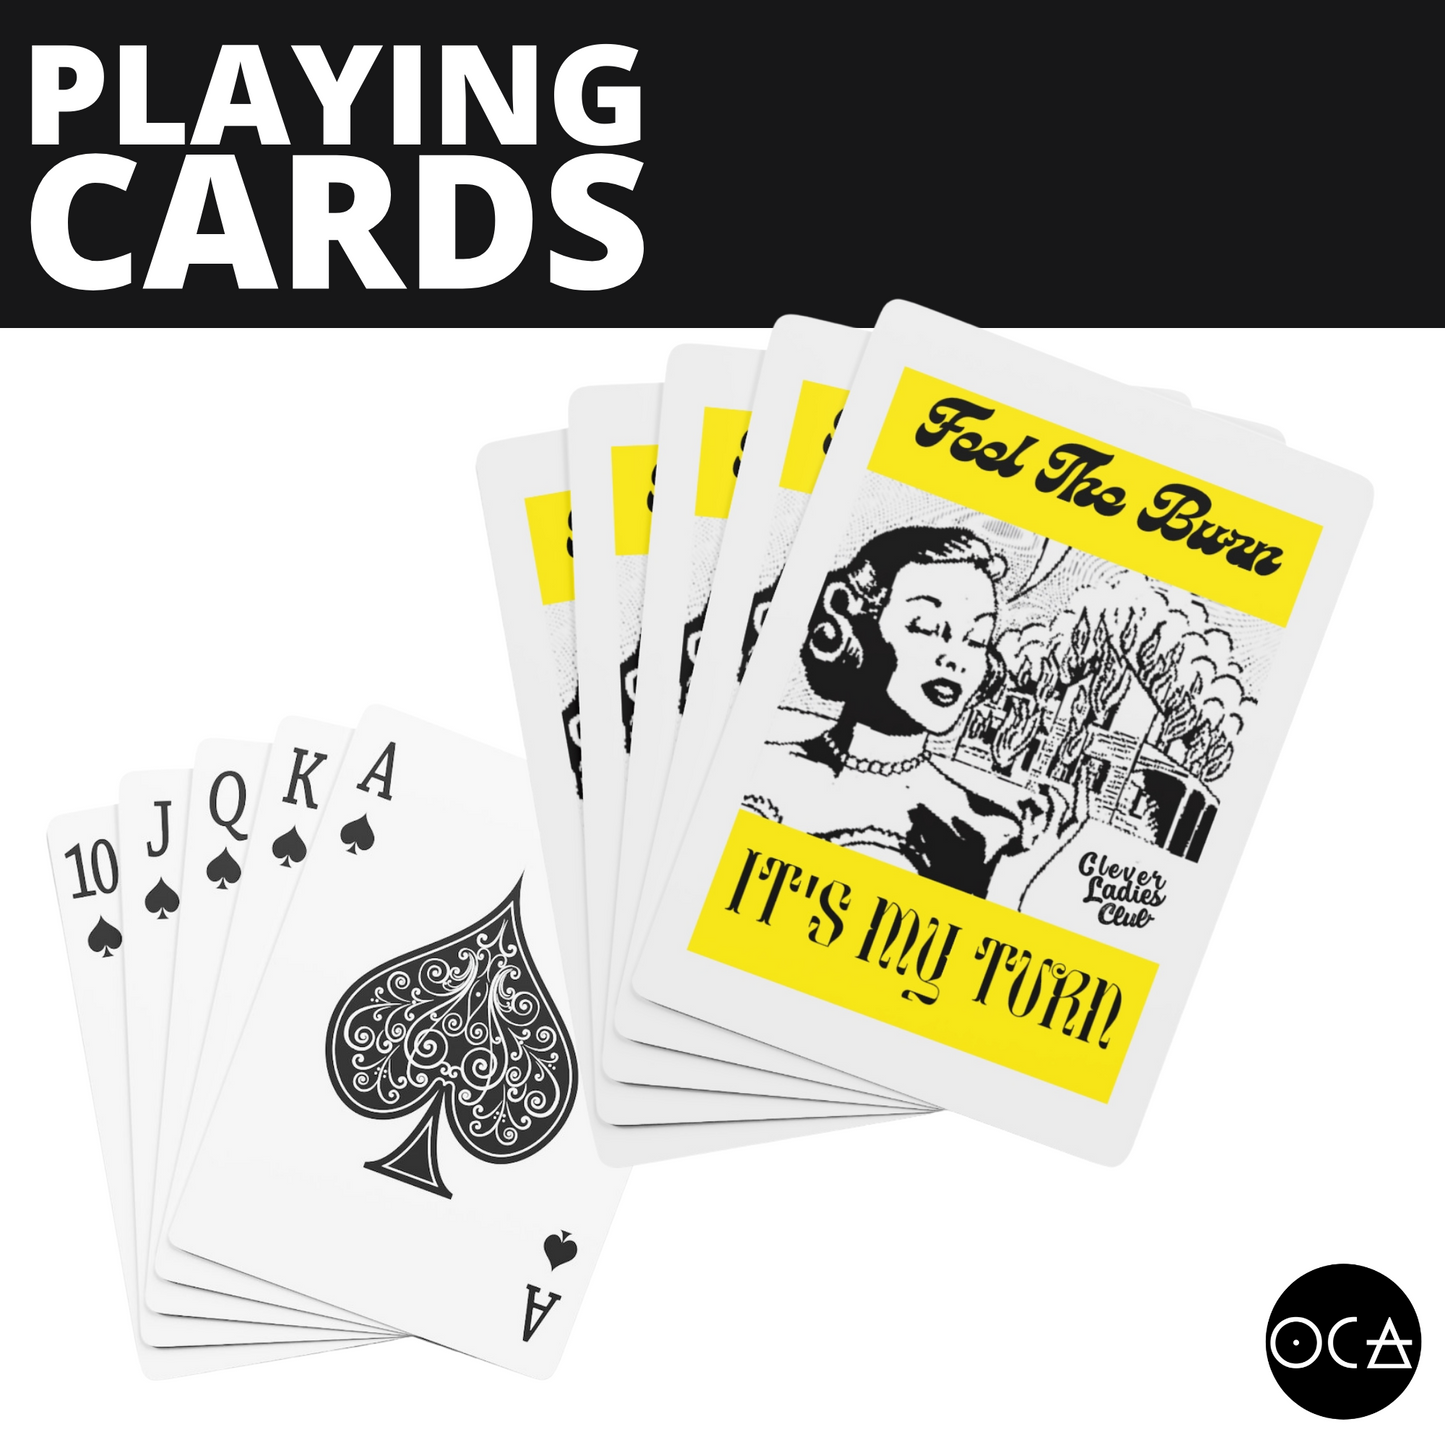 Feel the Burn Playing Cards (2 Design/Color Options)